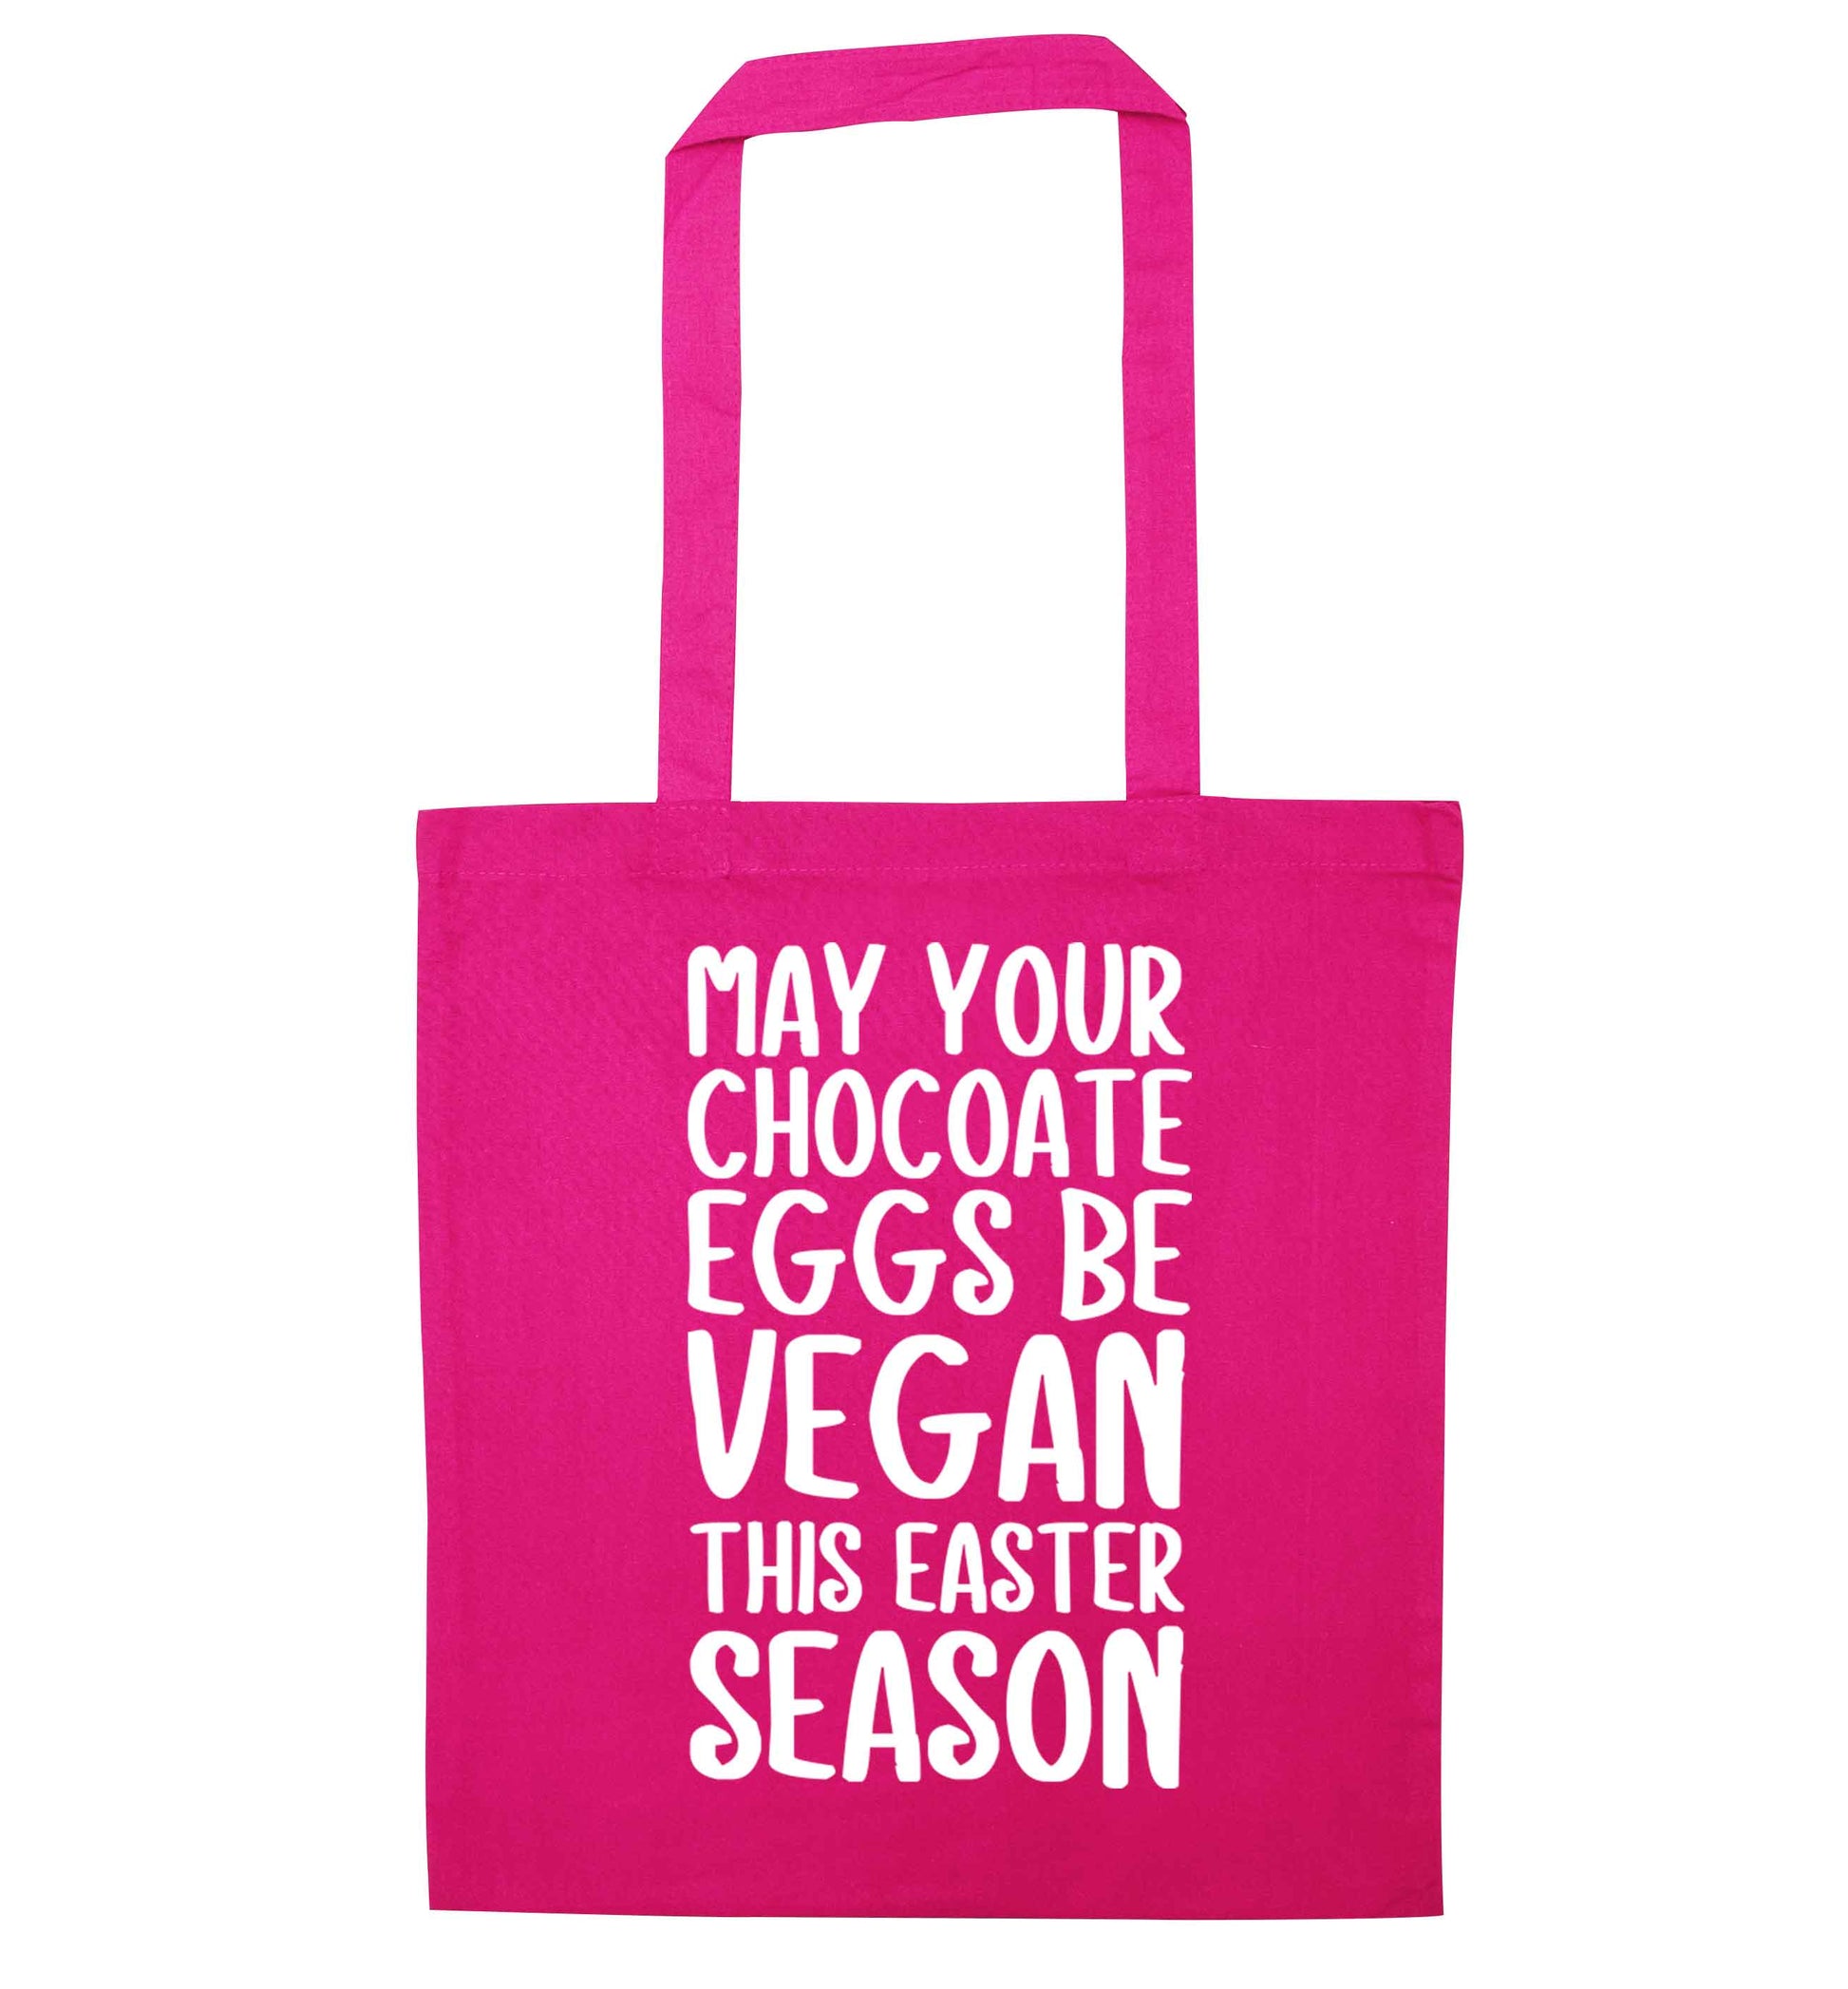 Easter bunny approved! Vegans will love this easter themed pink tote bag